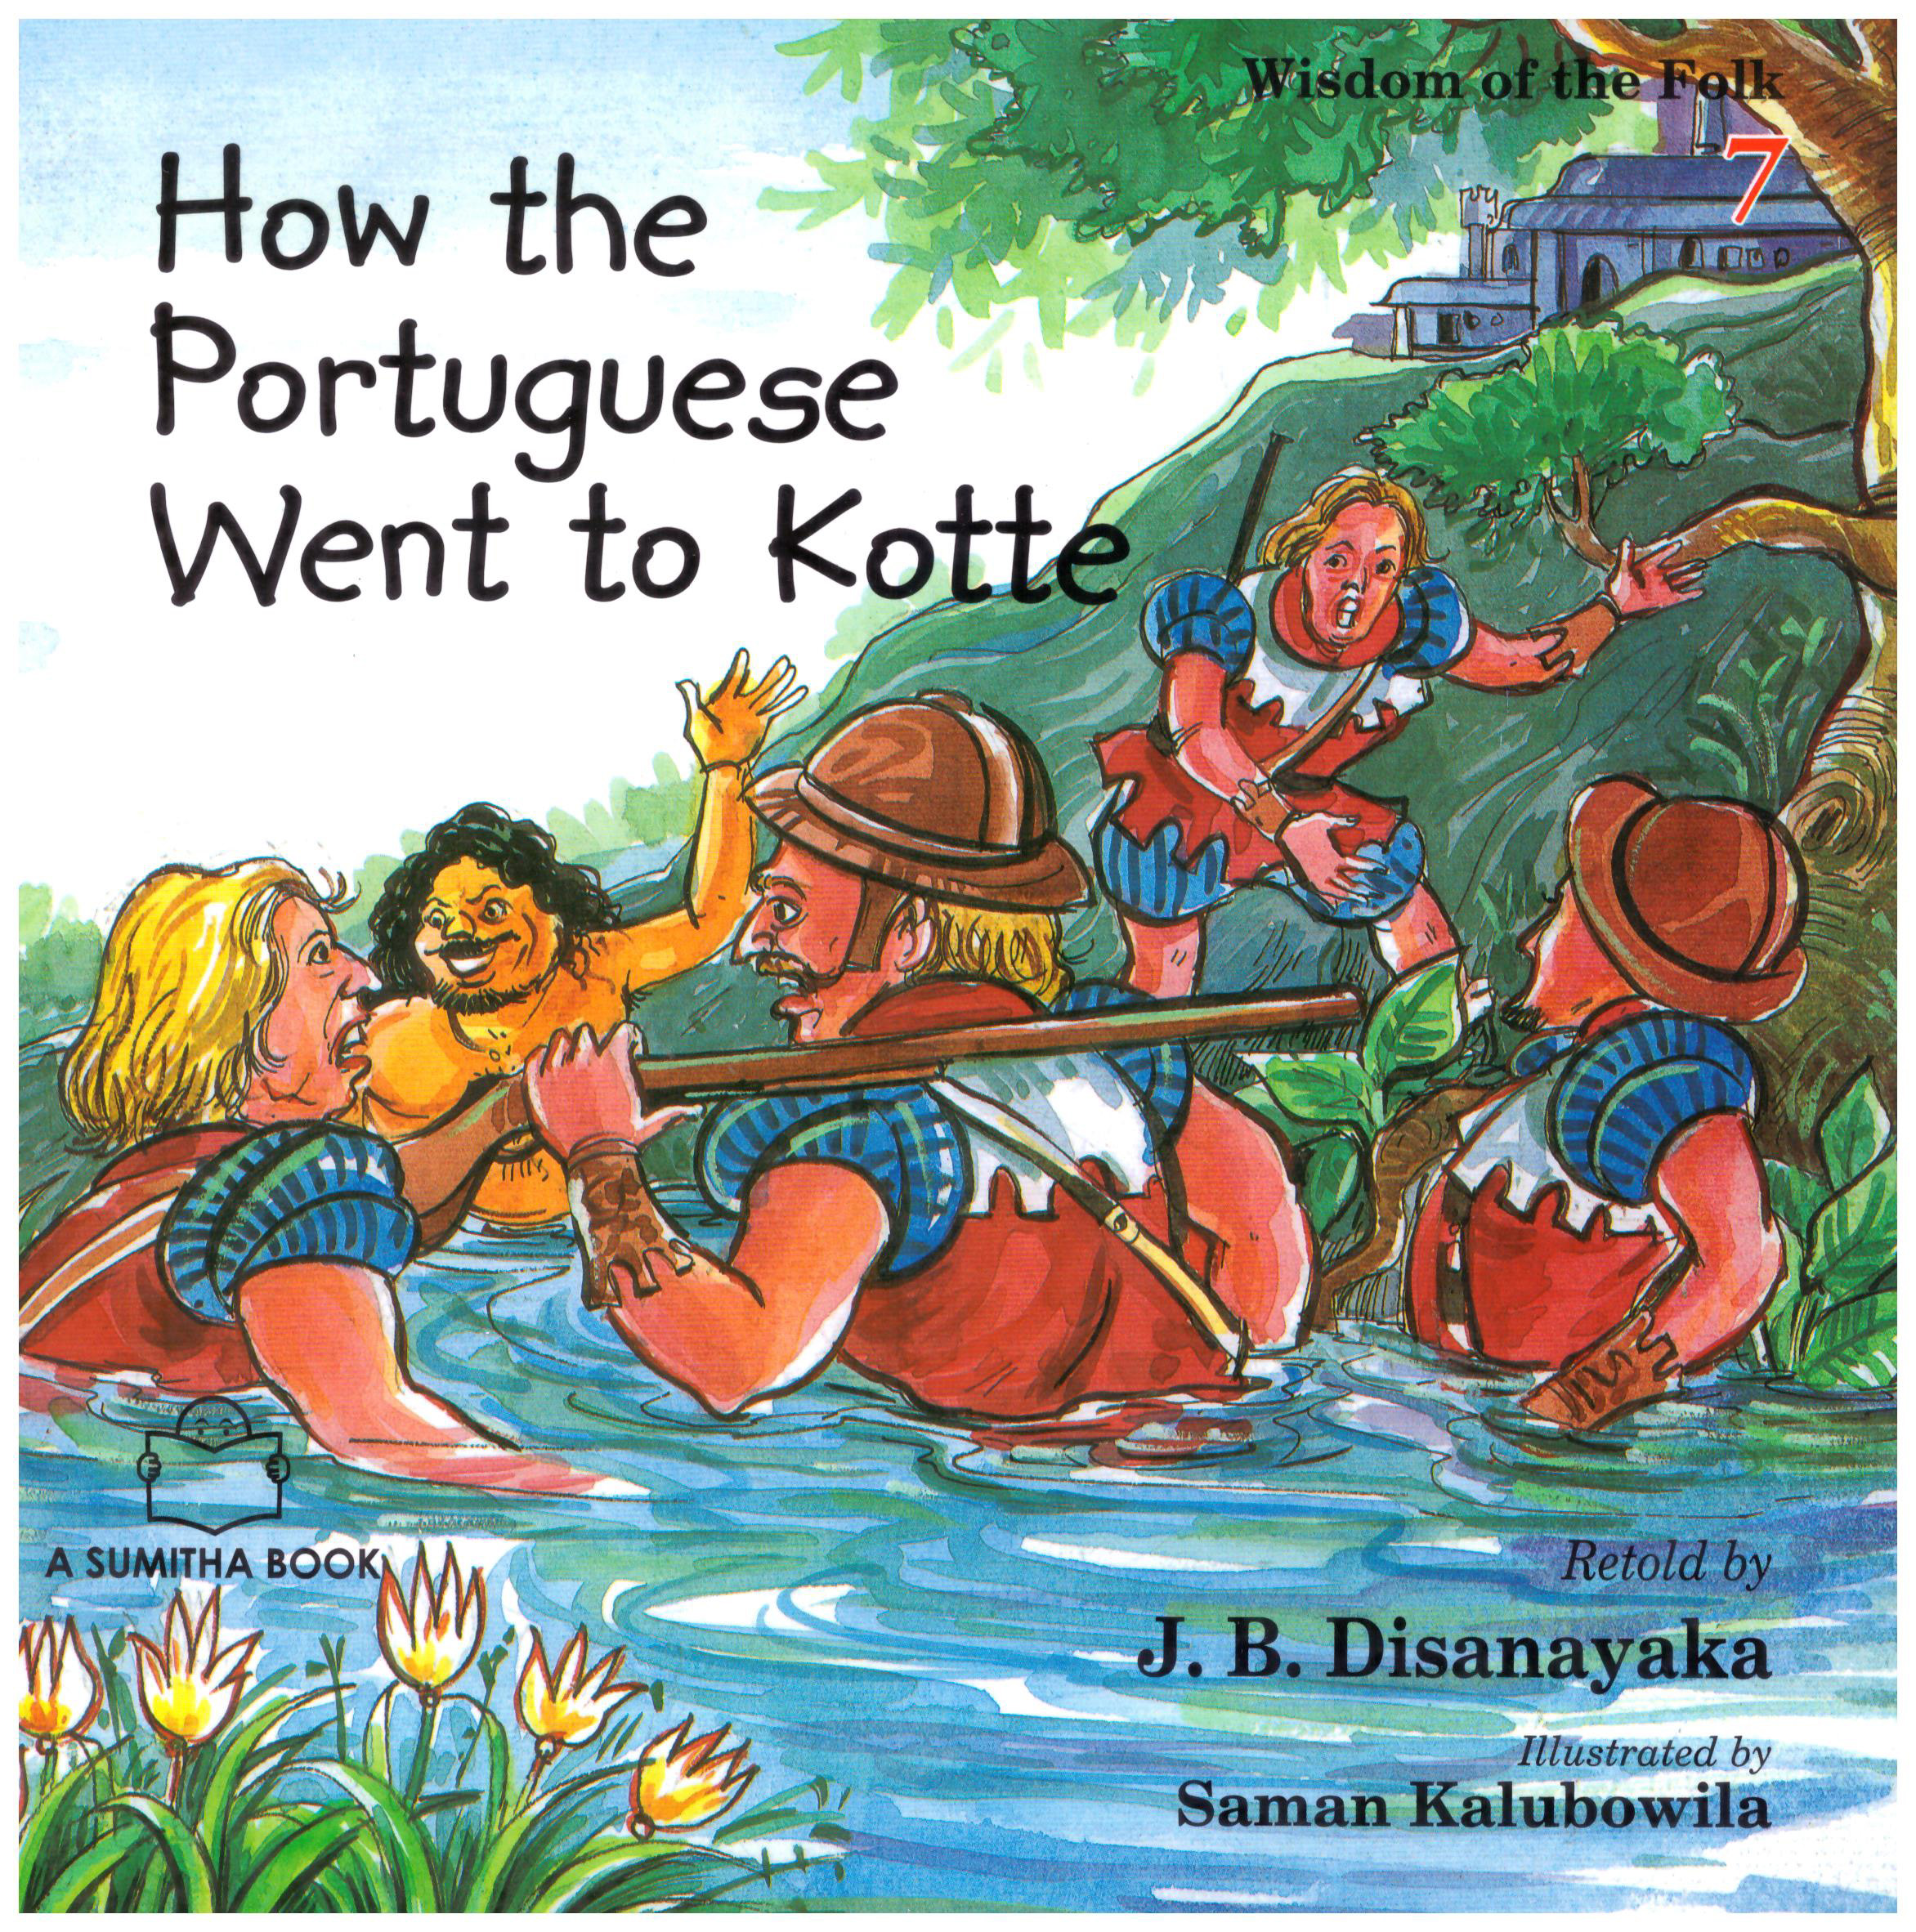 Wisdom of the Folk 7 - How the Portuguese Went to Kotte